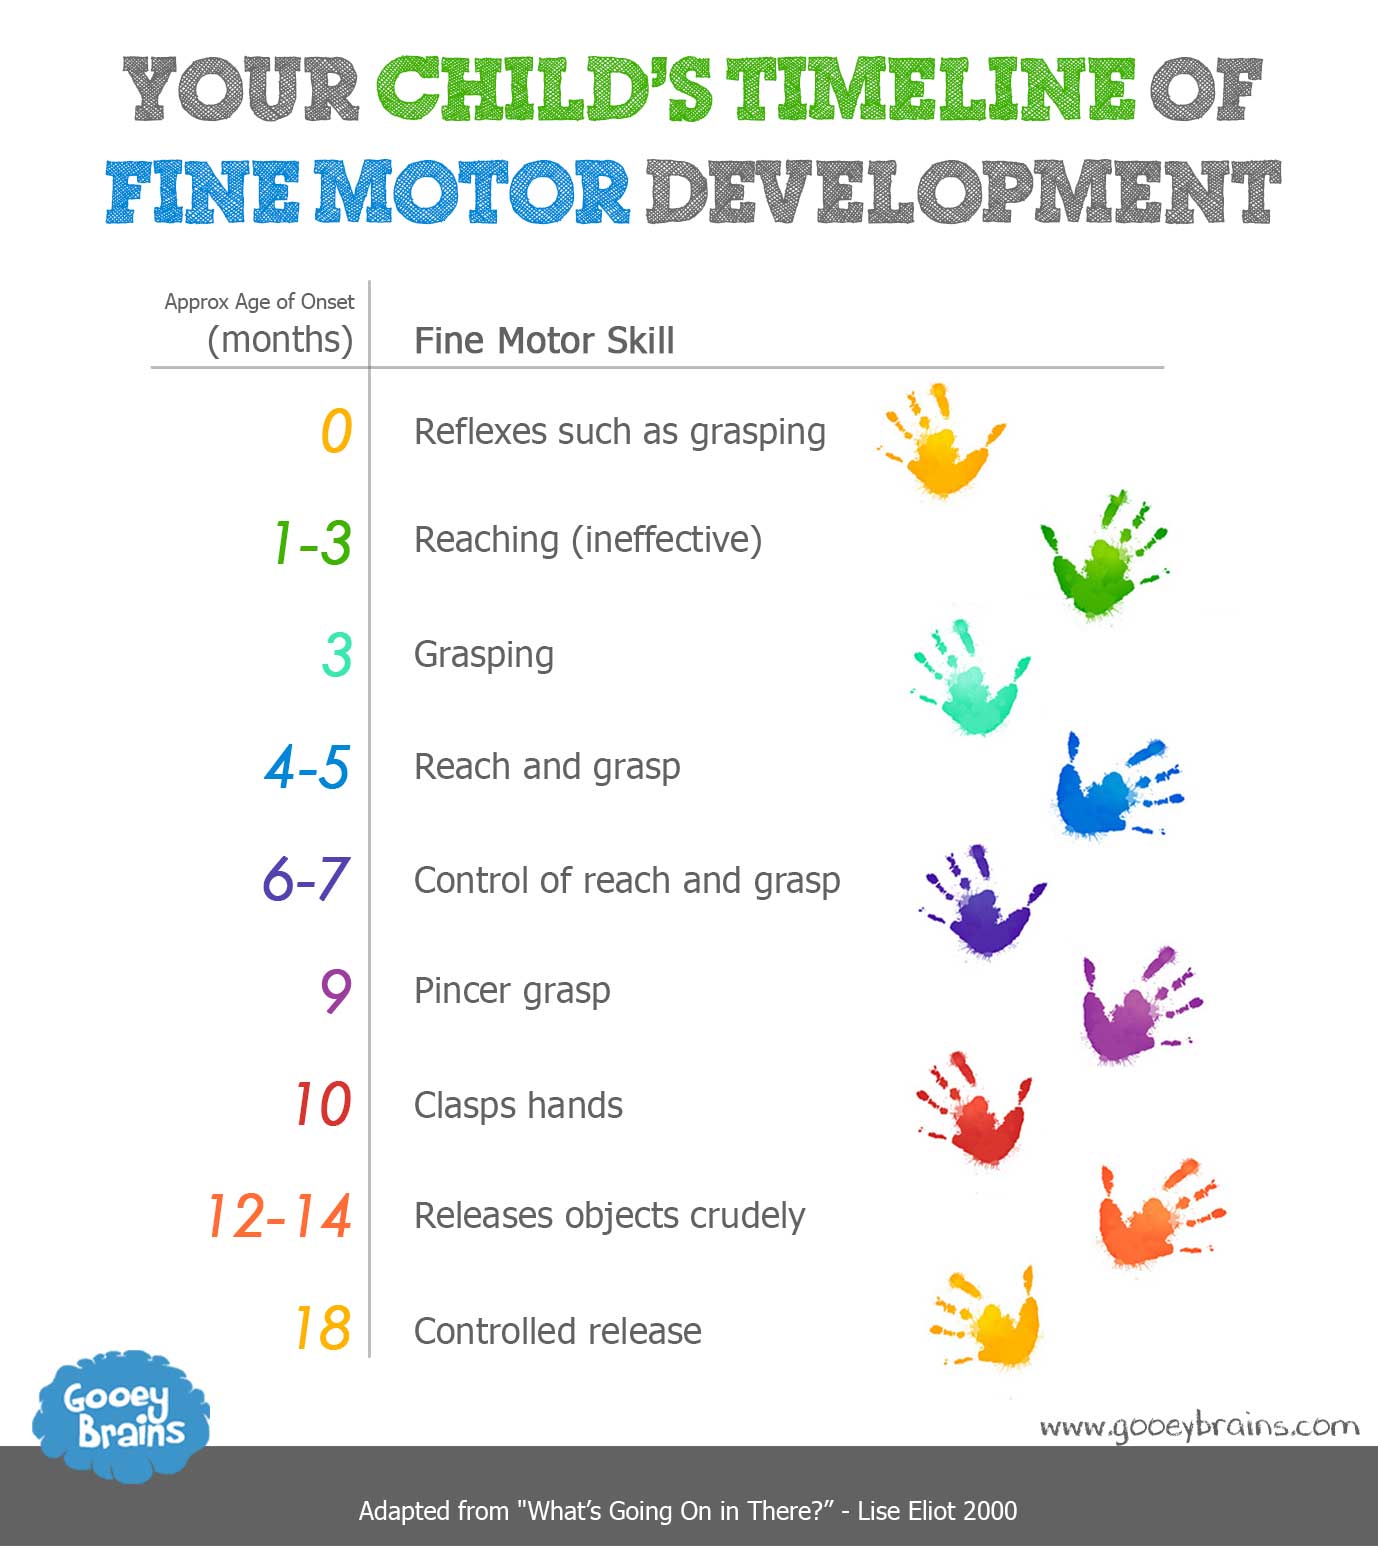 What are 5 fine motor skills?